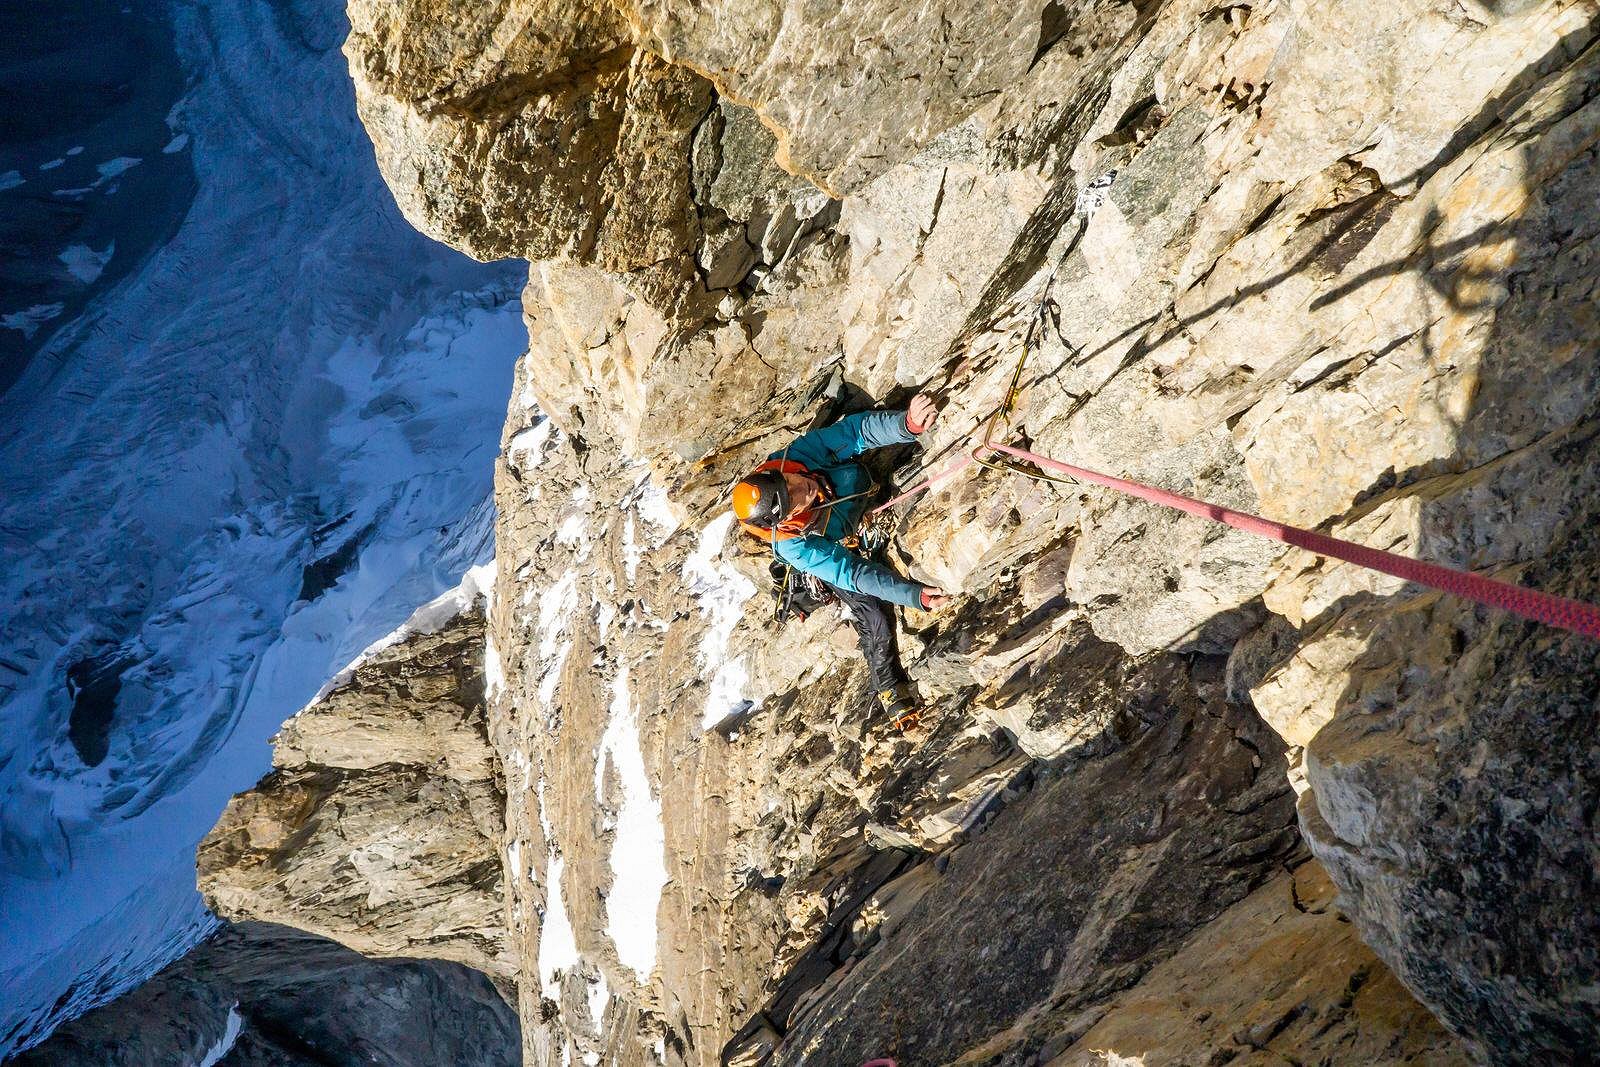 Ally Swinton on the first ascent of The Great Game, Koyo Zum, Pakistan.  © Tom Livingstone